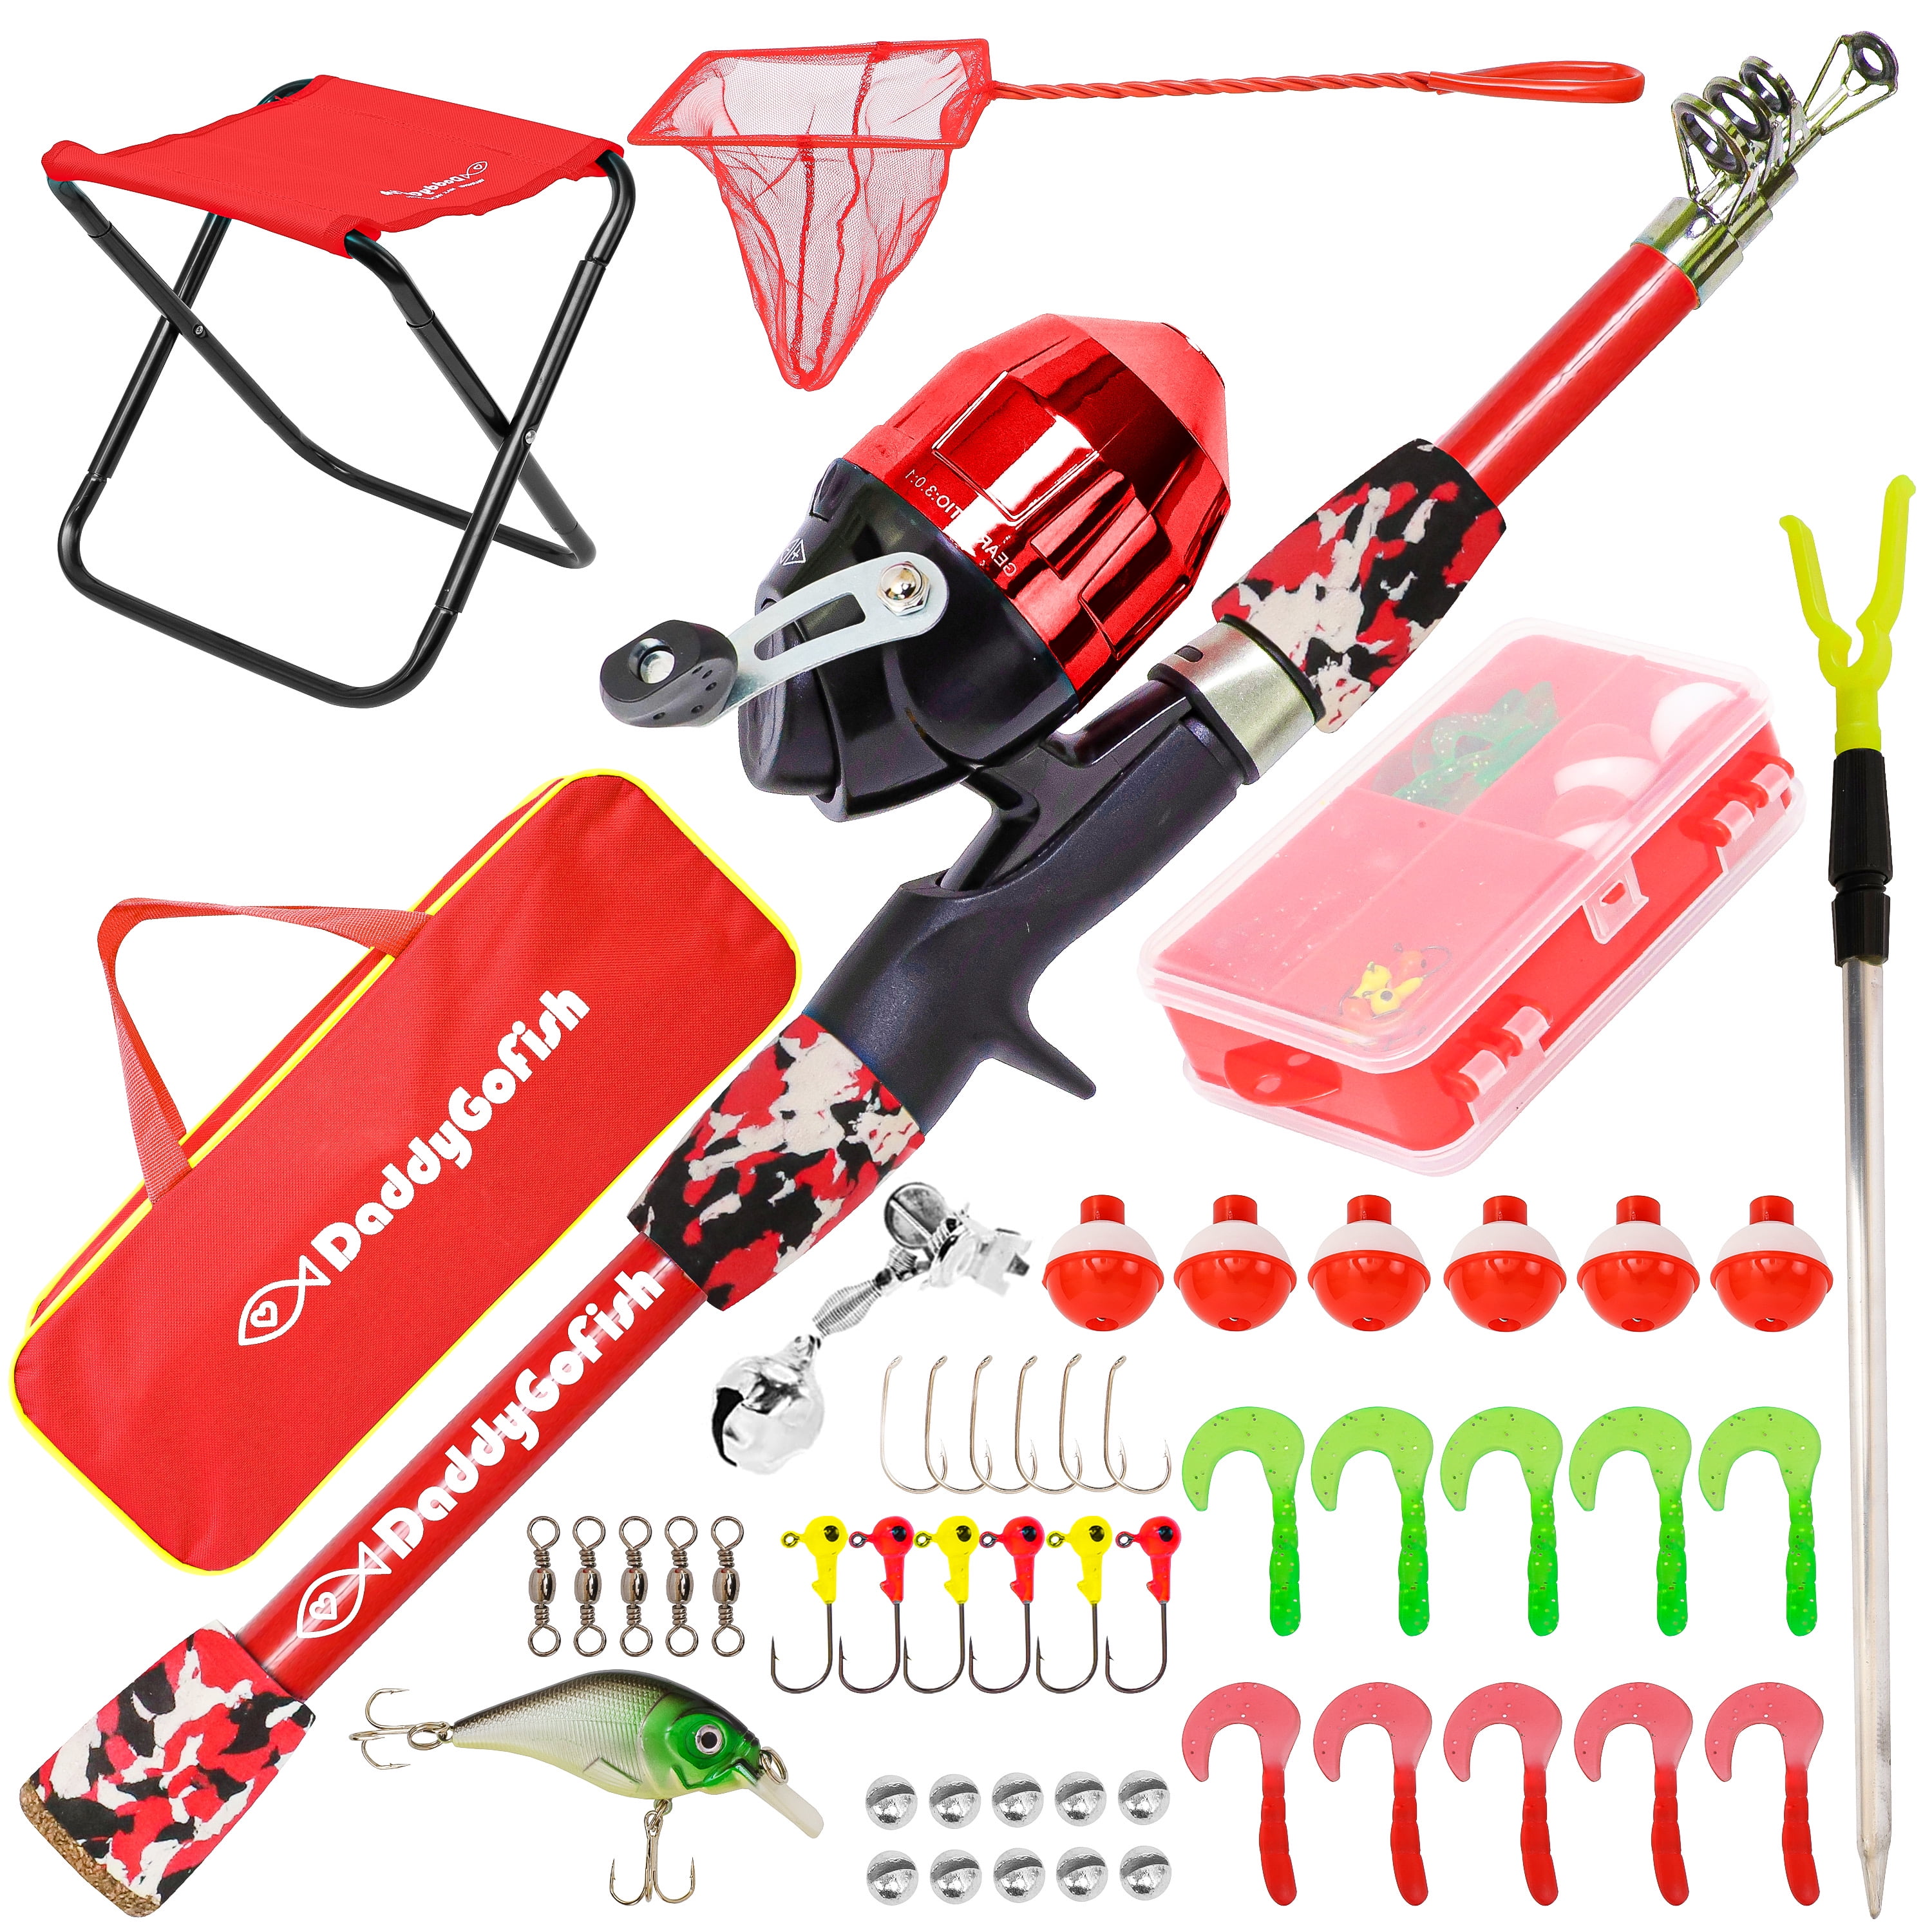 Kids Fishing Pole Kit, 59'' Telescopic Rod and Reel Beginner Combo with Spincast Reel,Tackle Box, Carrier Bag,Fishing Gear Gifts for Boys,Girls